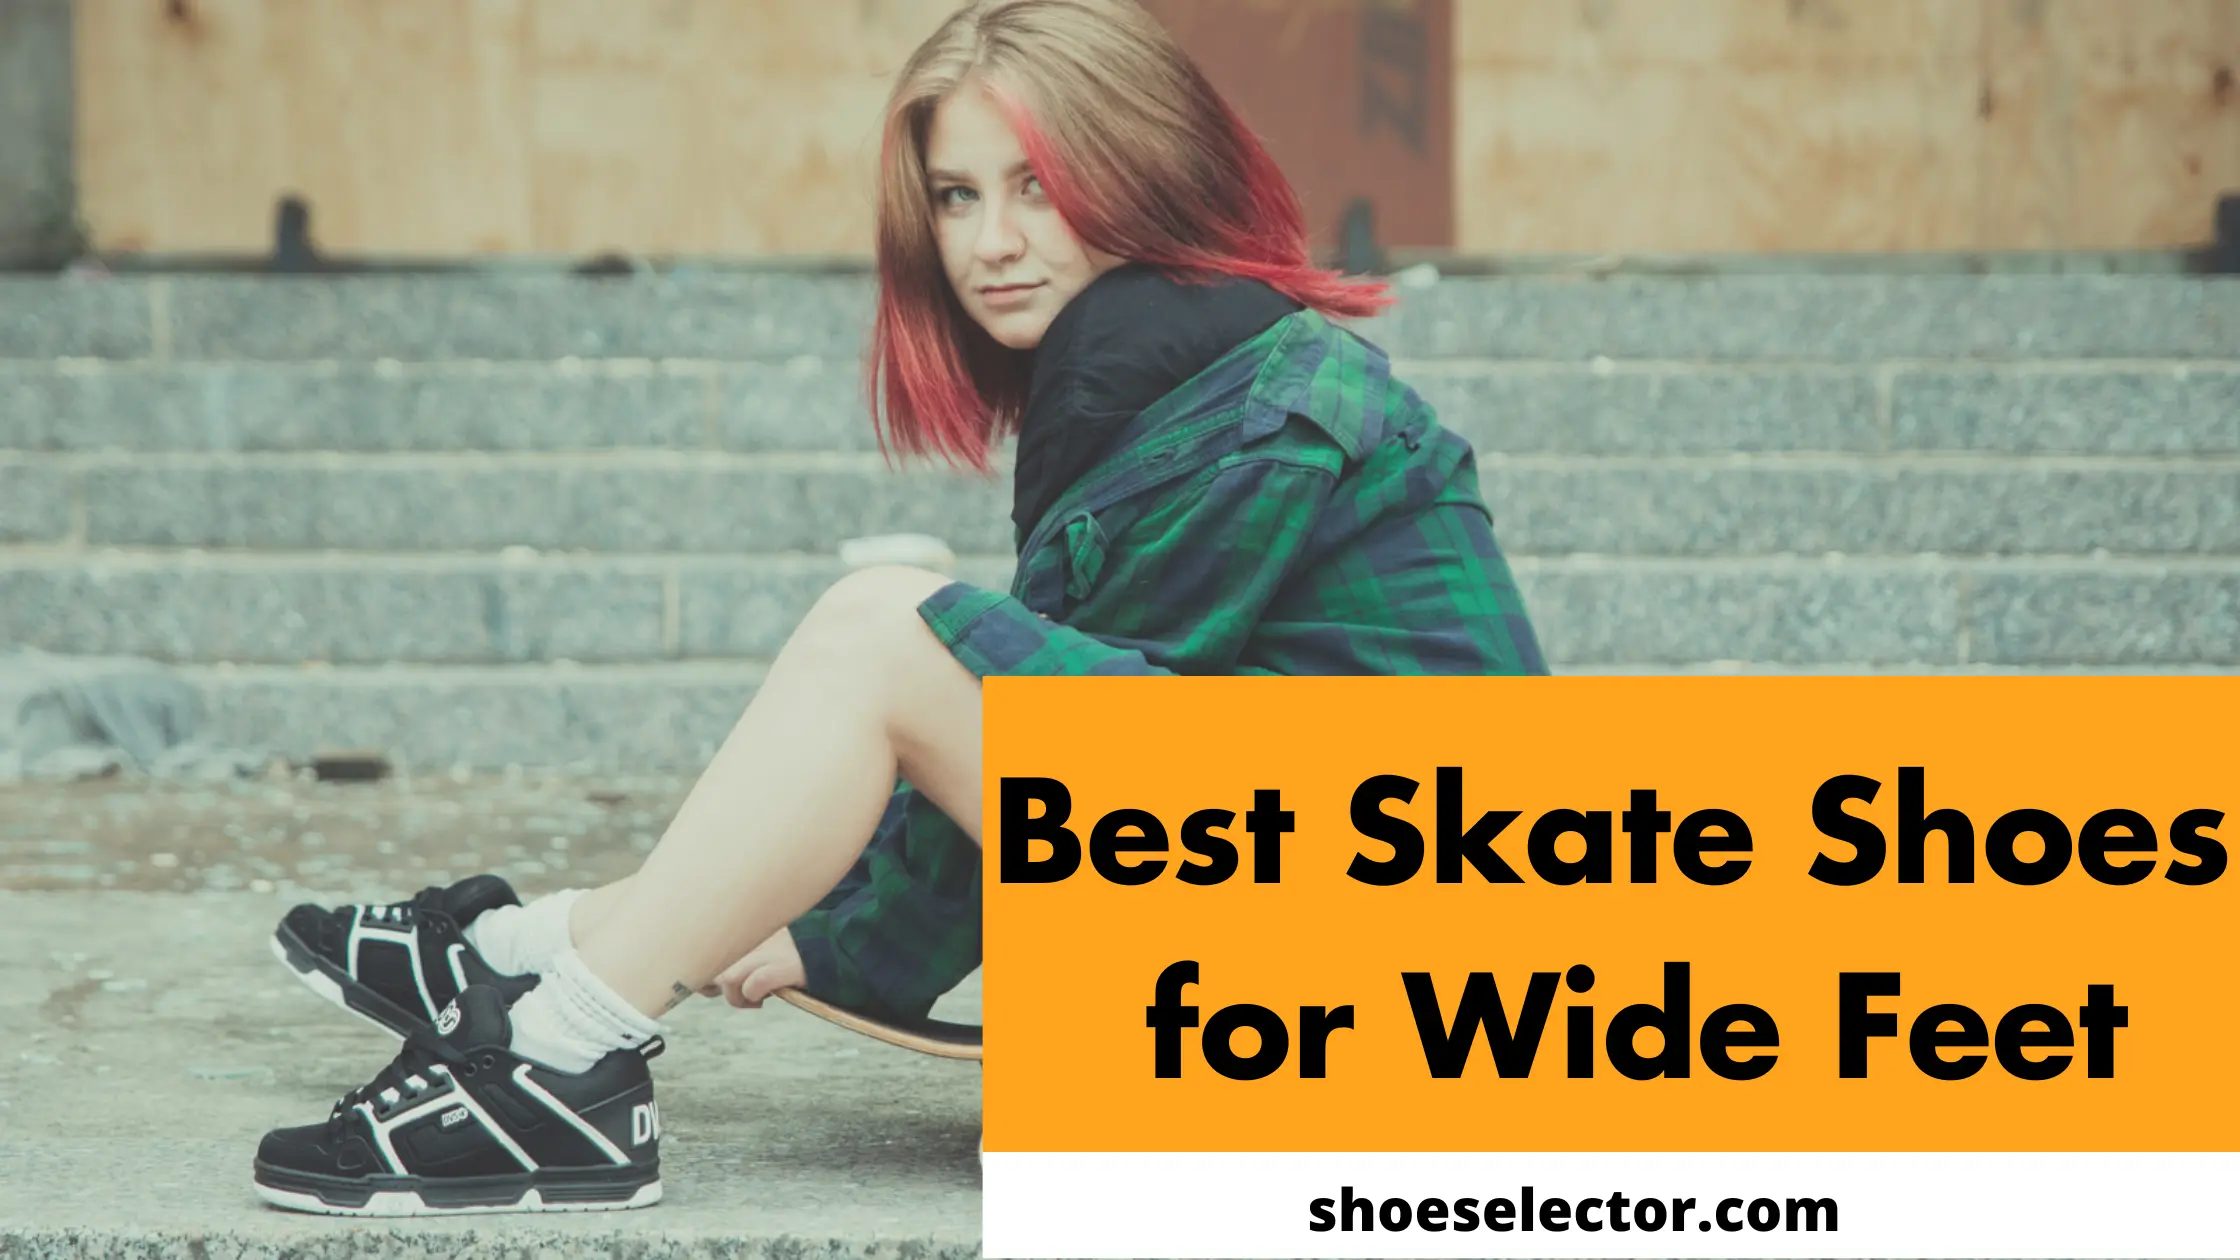 Best Skate Shoes For Wide Feet - Complete Buying Guides